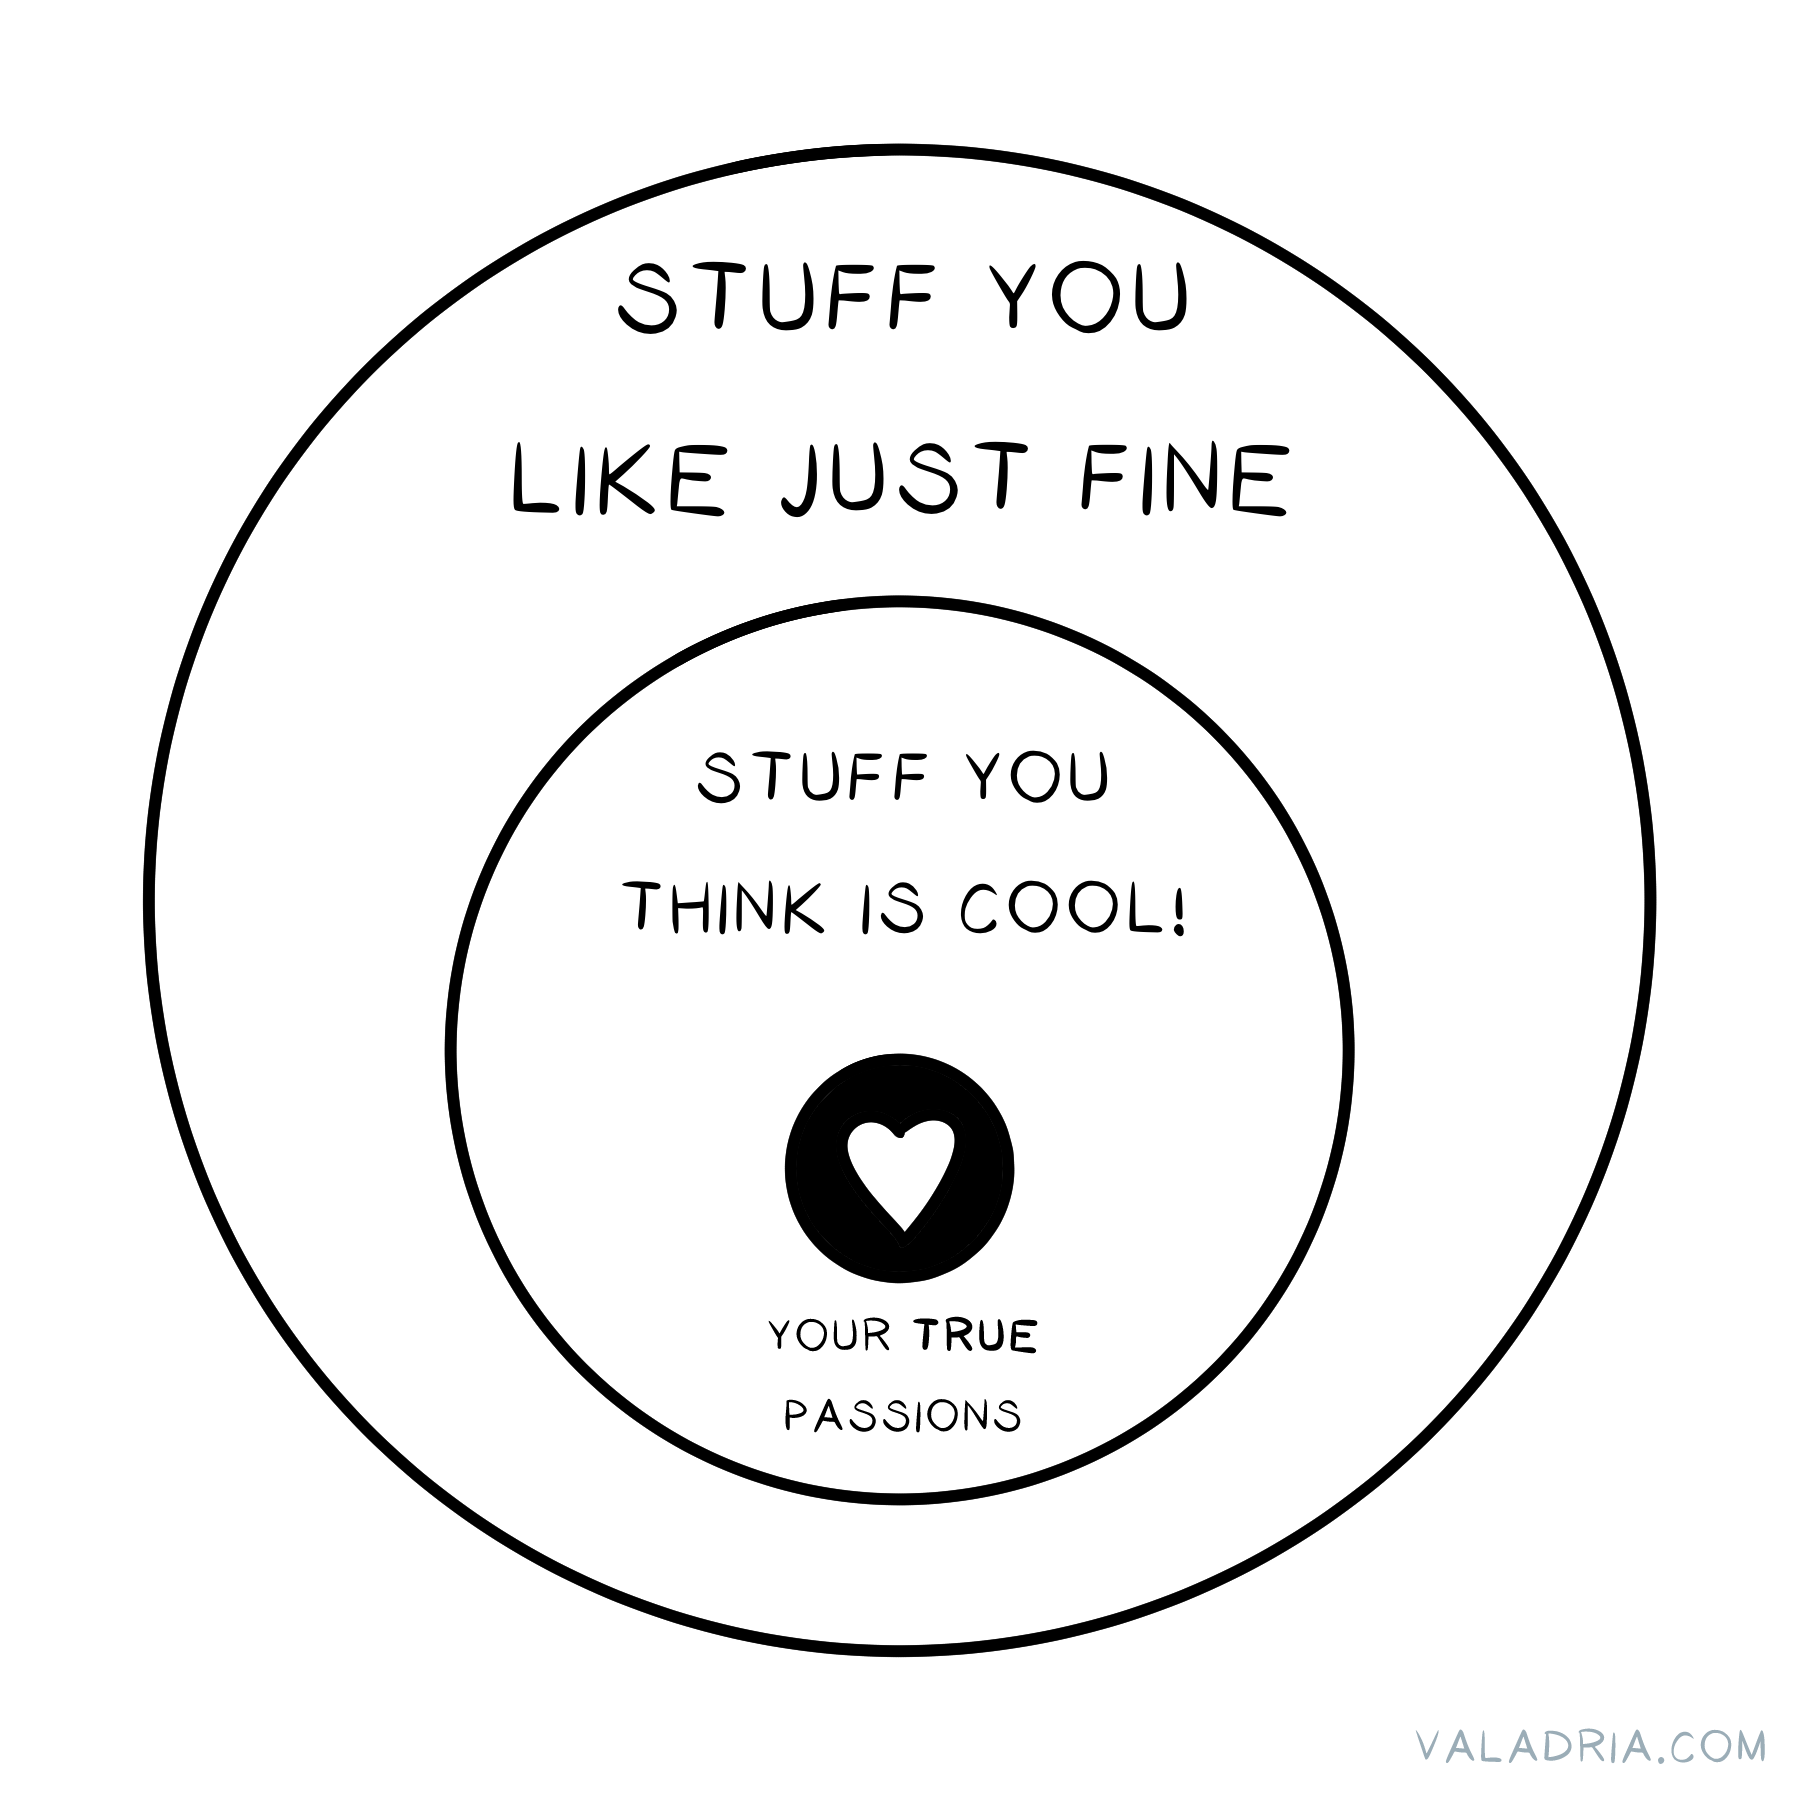 Three concentric circles. The largest is labeled "Stuff you like just fine", inside that is "Stuff you think is cool!" and the last one inside that (with a heart in the center) is labeled, "Your TRUE passions."